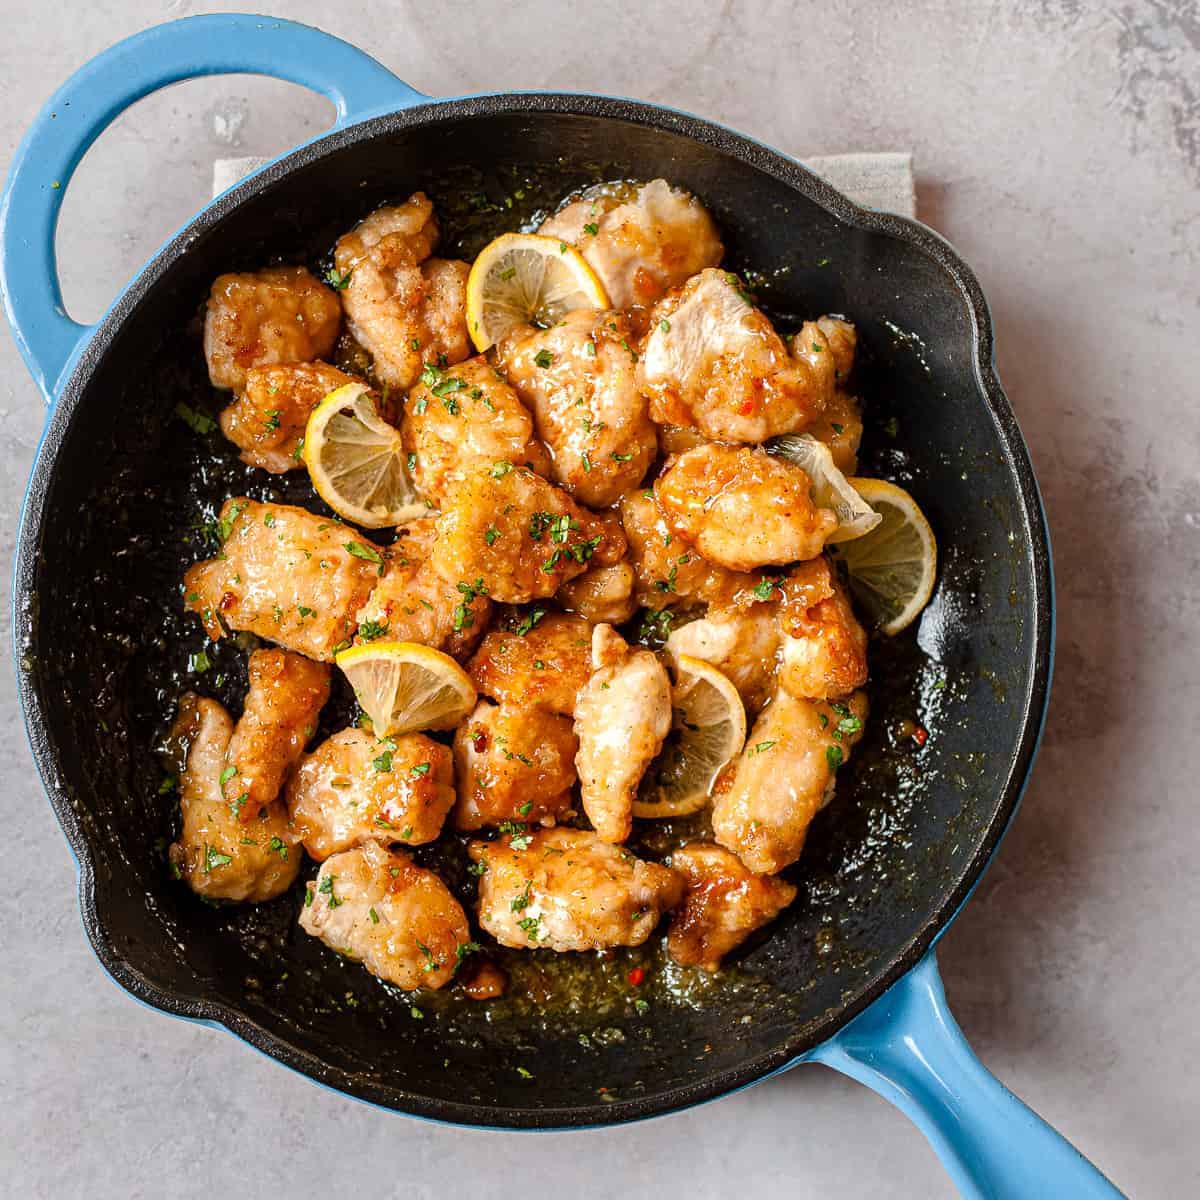 Crispy Chinese lemon chicken in a skillet. Made using only Aldi ingredients.